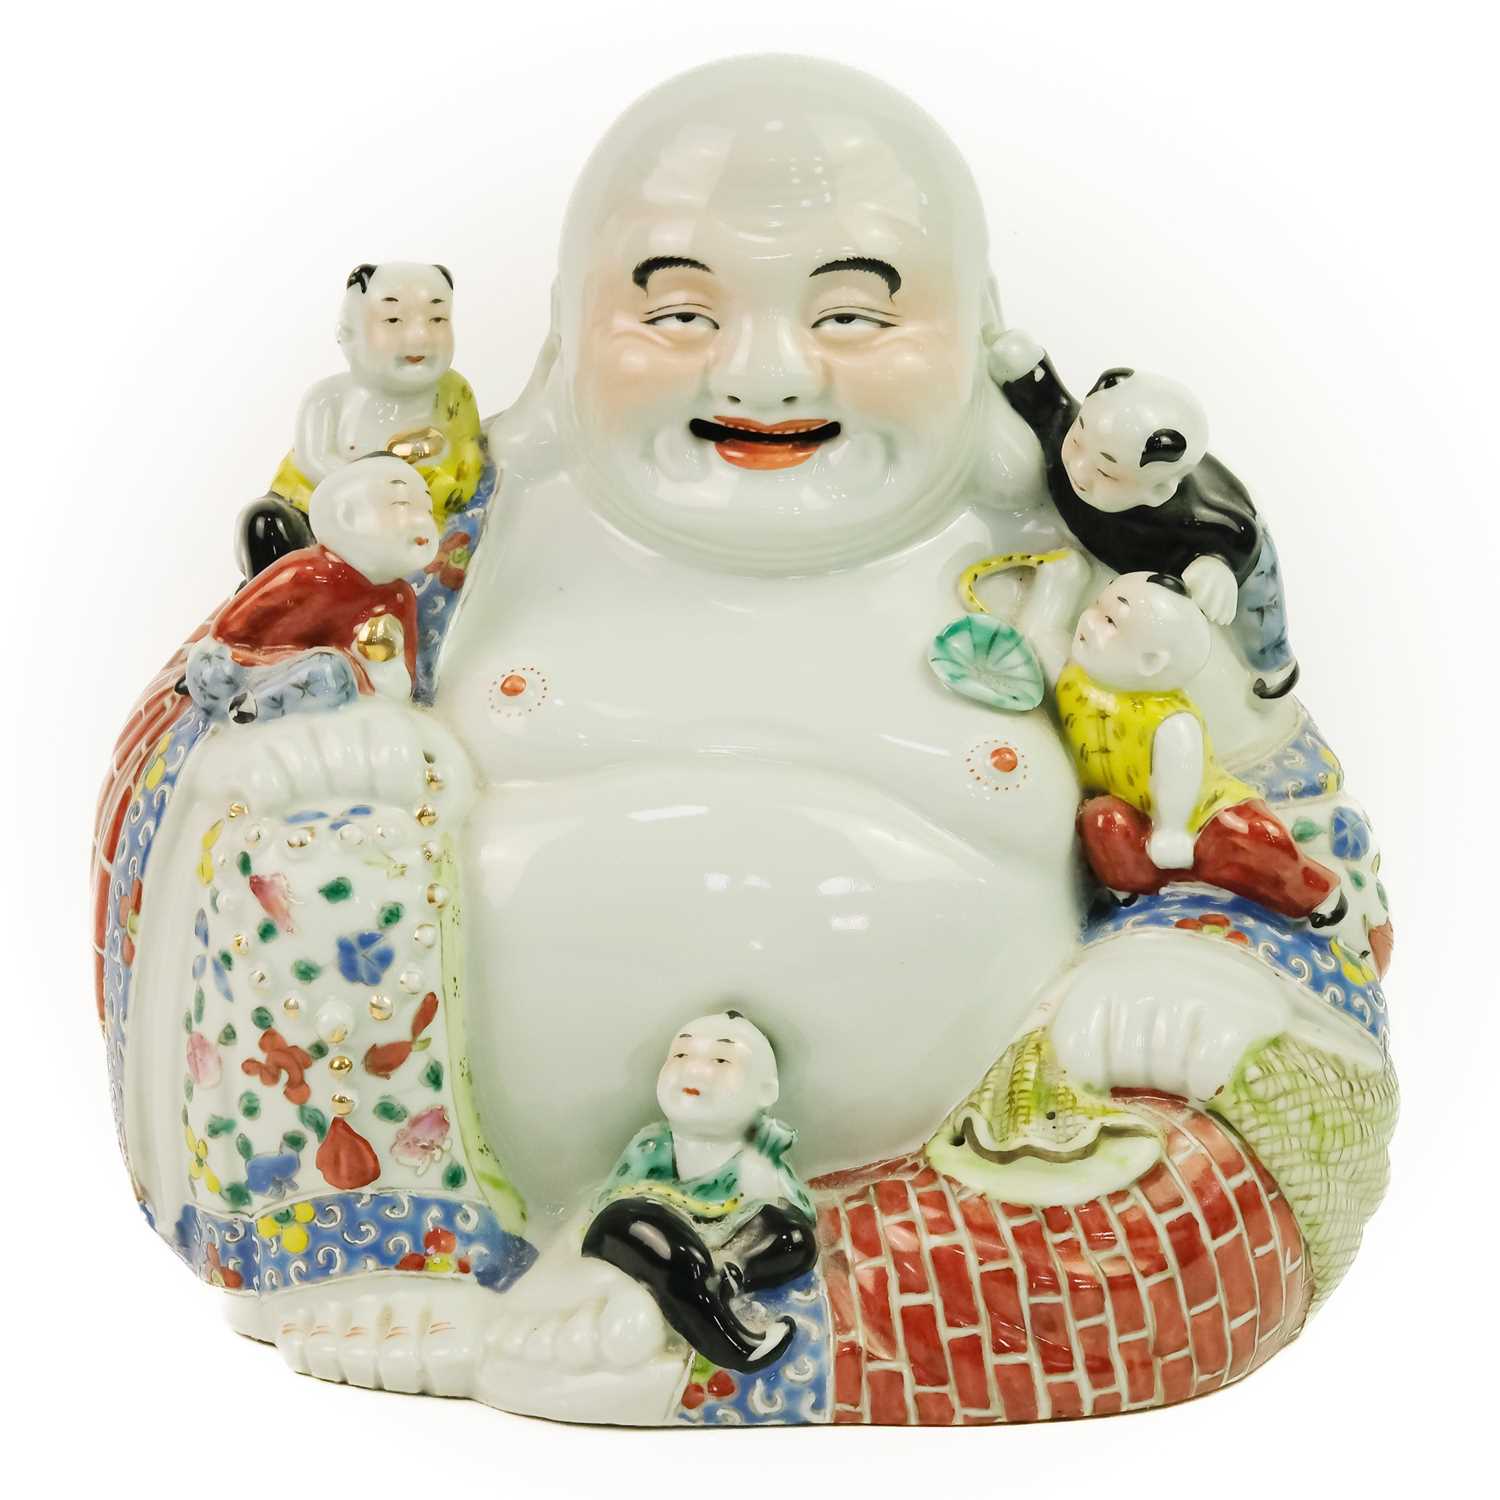 A large Chinese porcelain model of Buddha, 20th century.